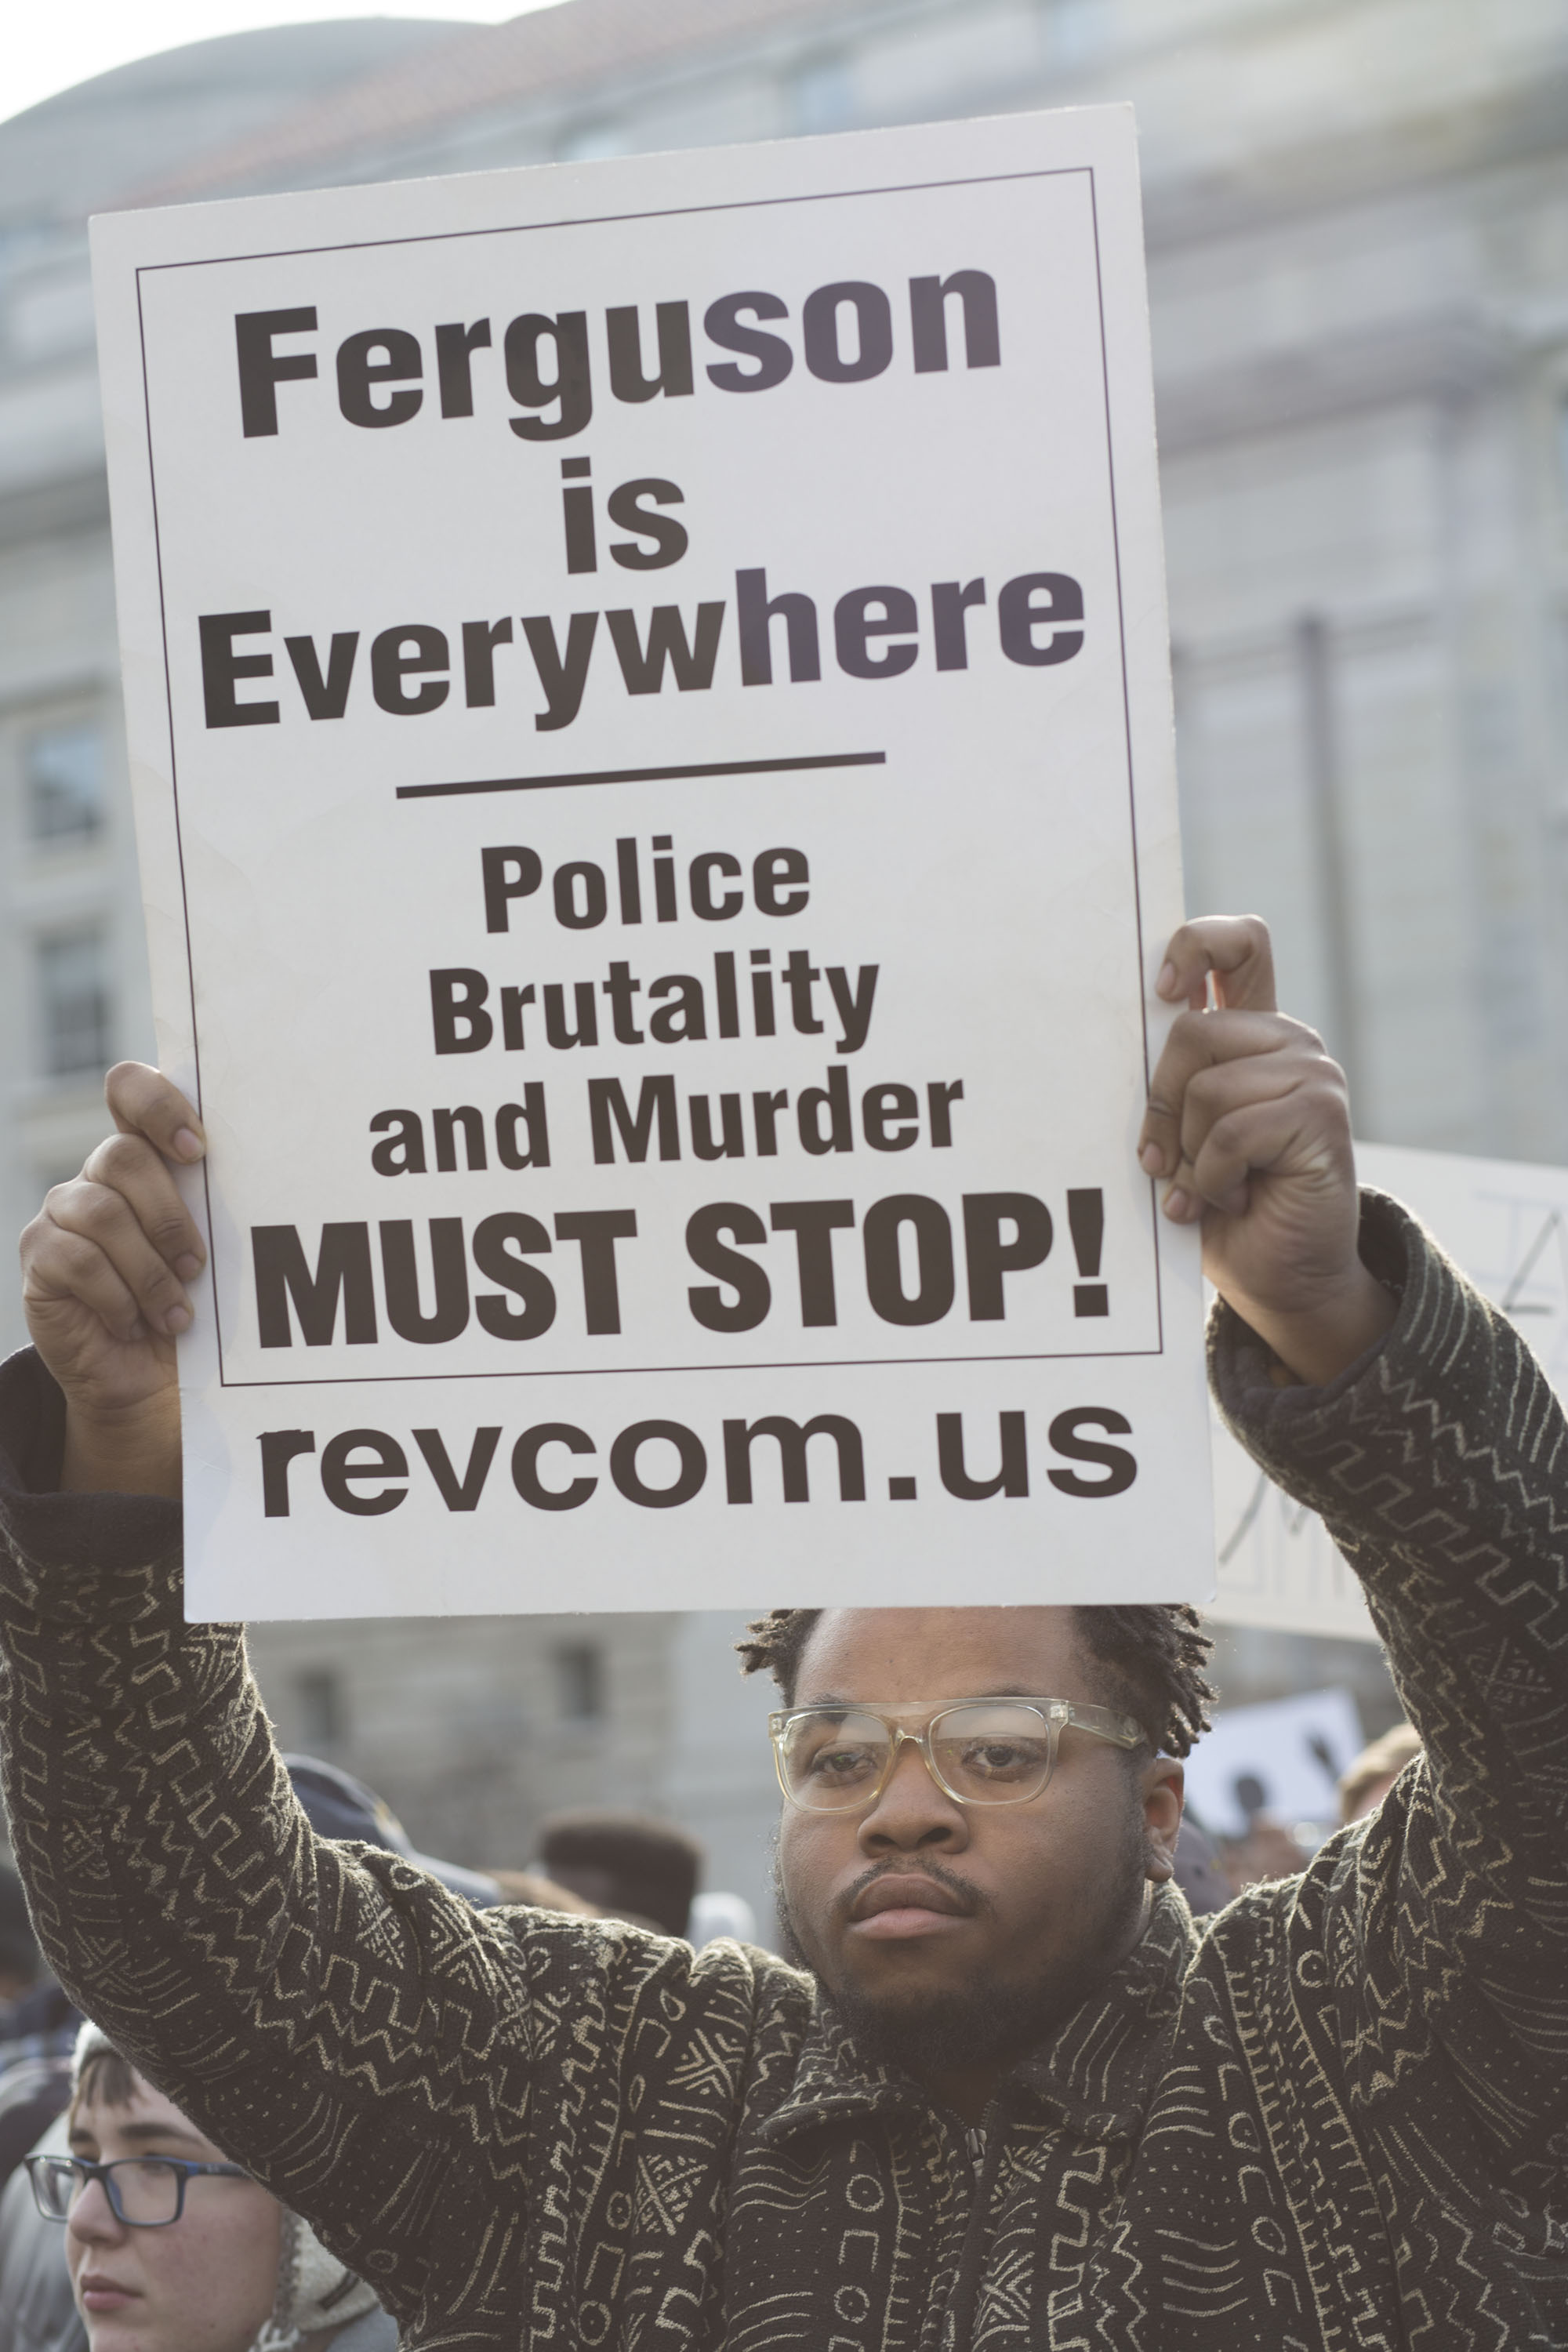 On Dec. 13, Al Sharpton organized a protest in Washington, D.C., to call for an end to racial profiling. (Photo: Stephen Shames/Polaris/Newscom)